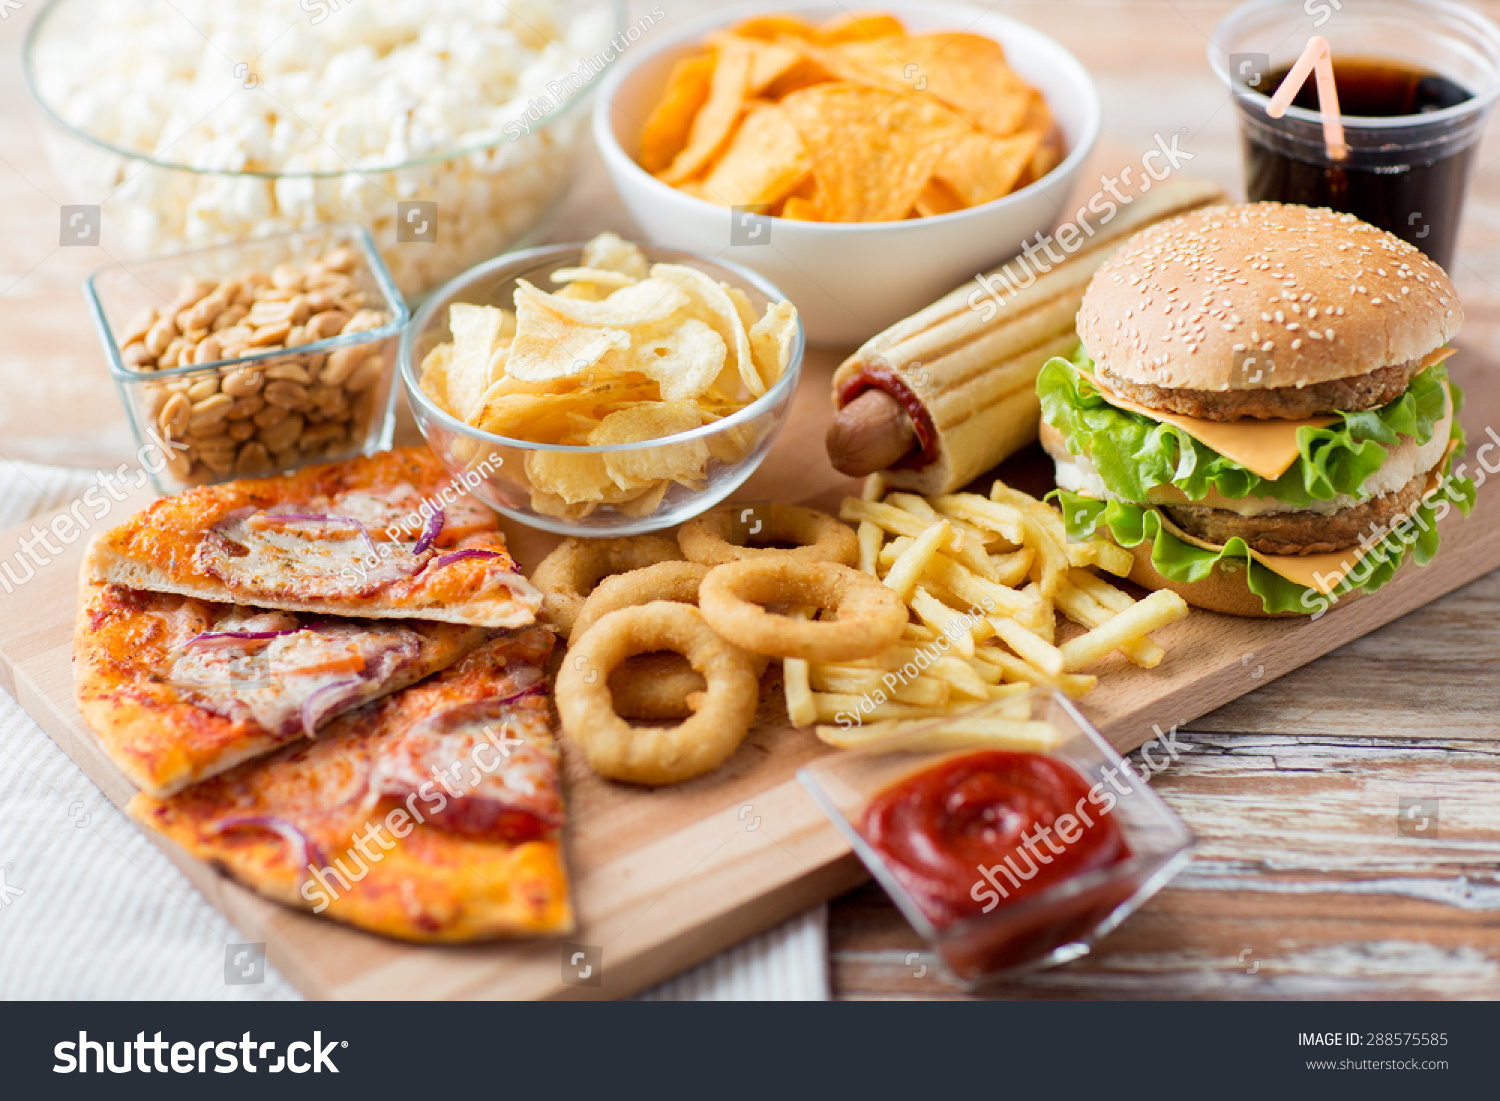 fast food and unhealthy eating concept - close up of fast food snacks and cola drink on wooden table #288575585